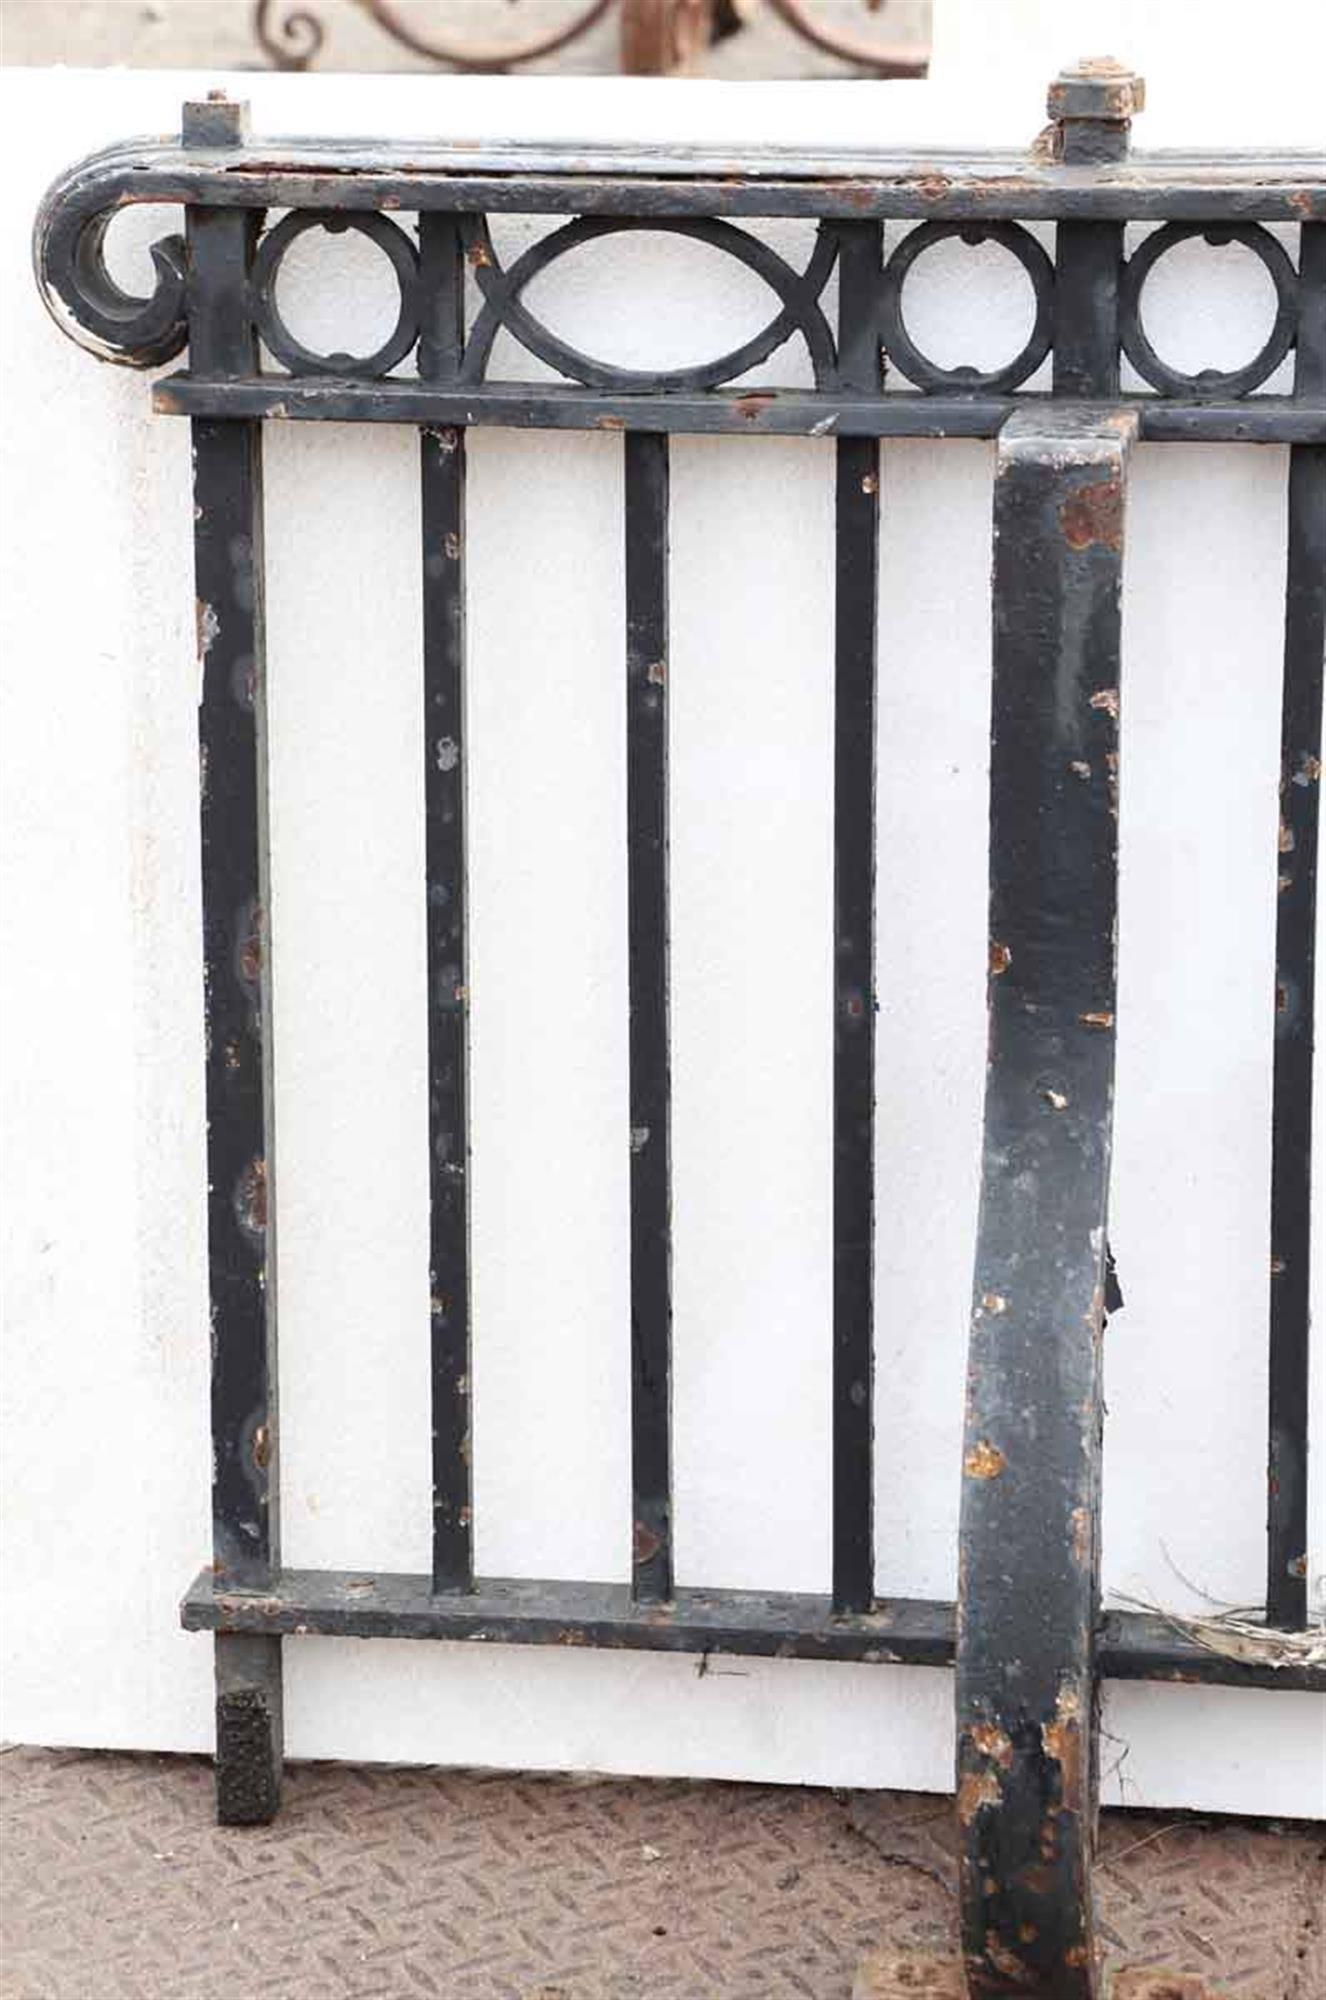 American 1905 Hand-Wrought Iron Juliet Balcony with Ornate Mounting Brackets